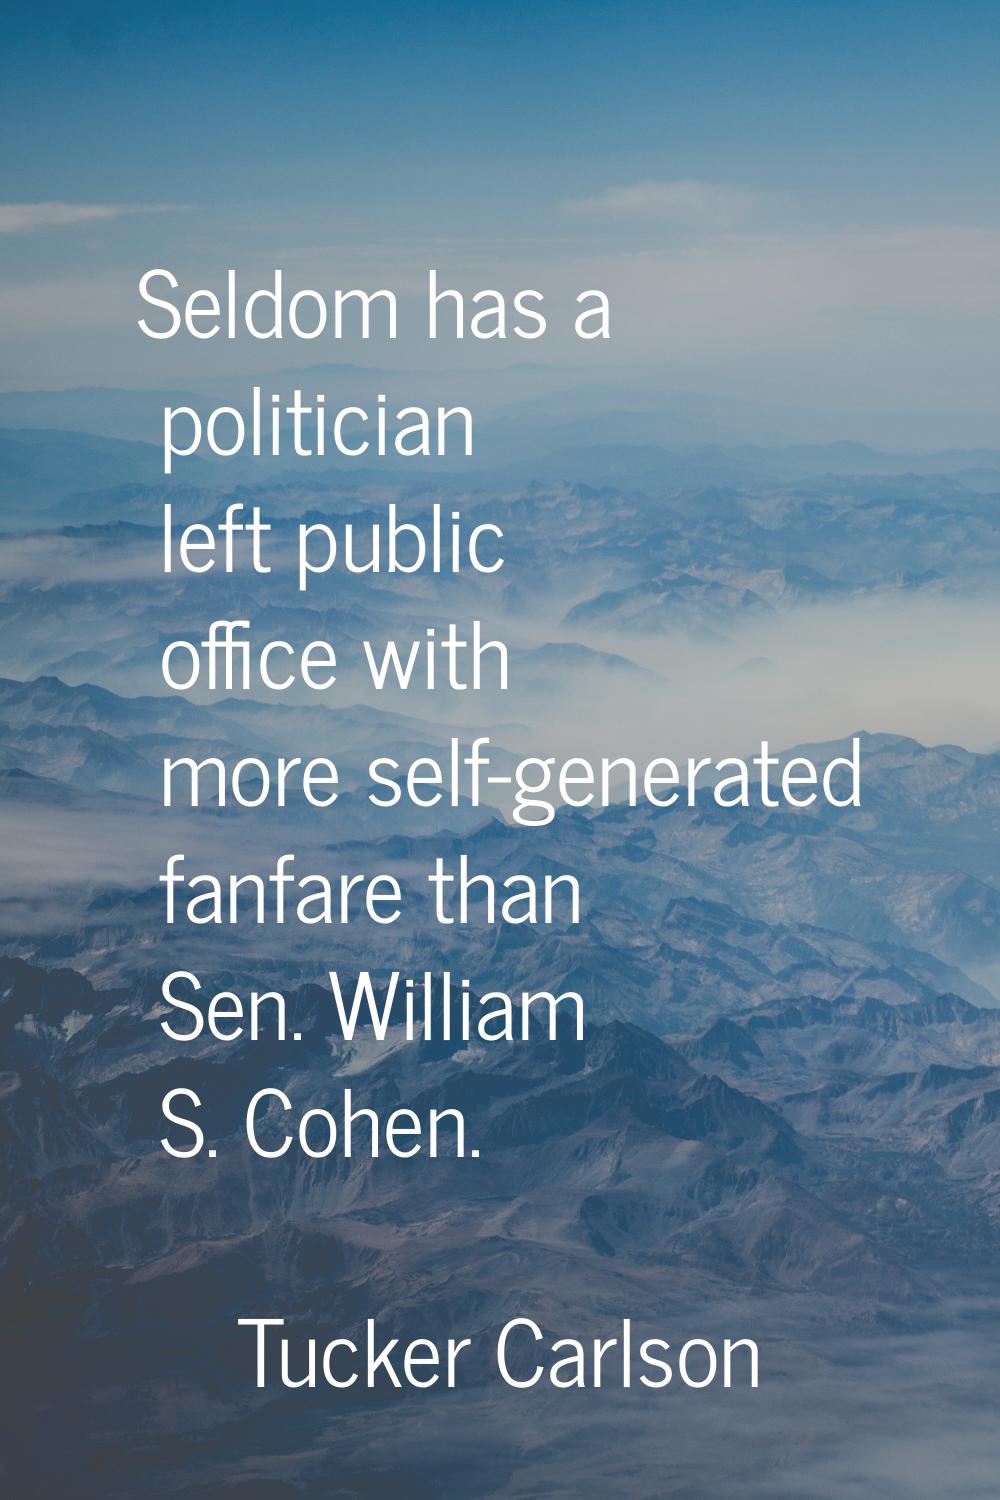 Seldom has a politician left public office with more self-generated fanfare than Sen. William S. Co